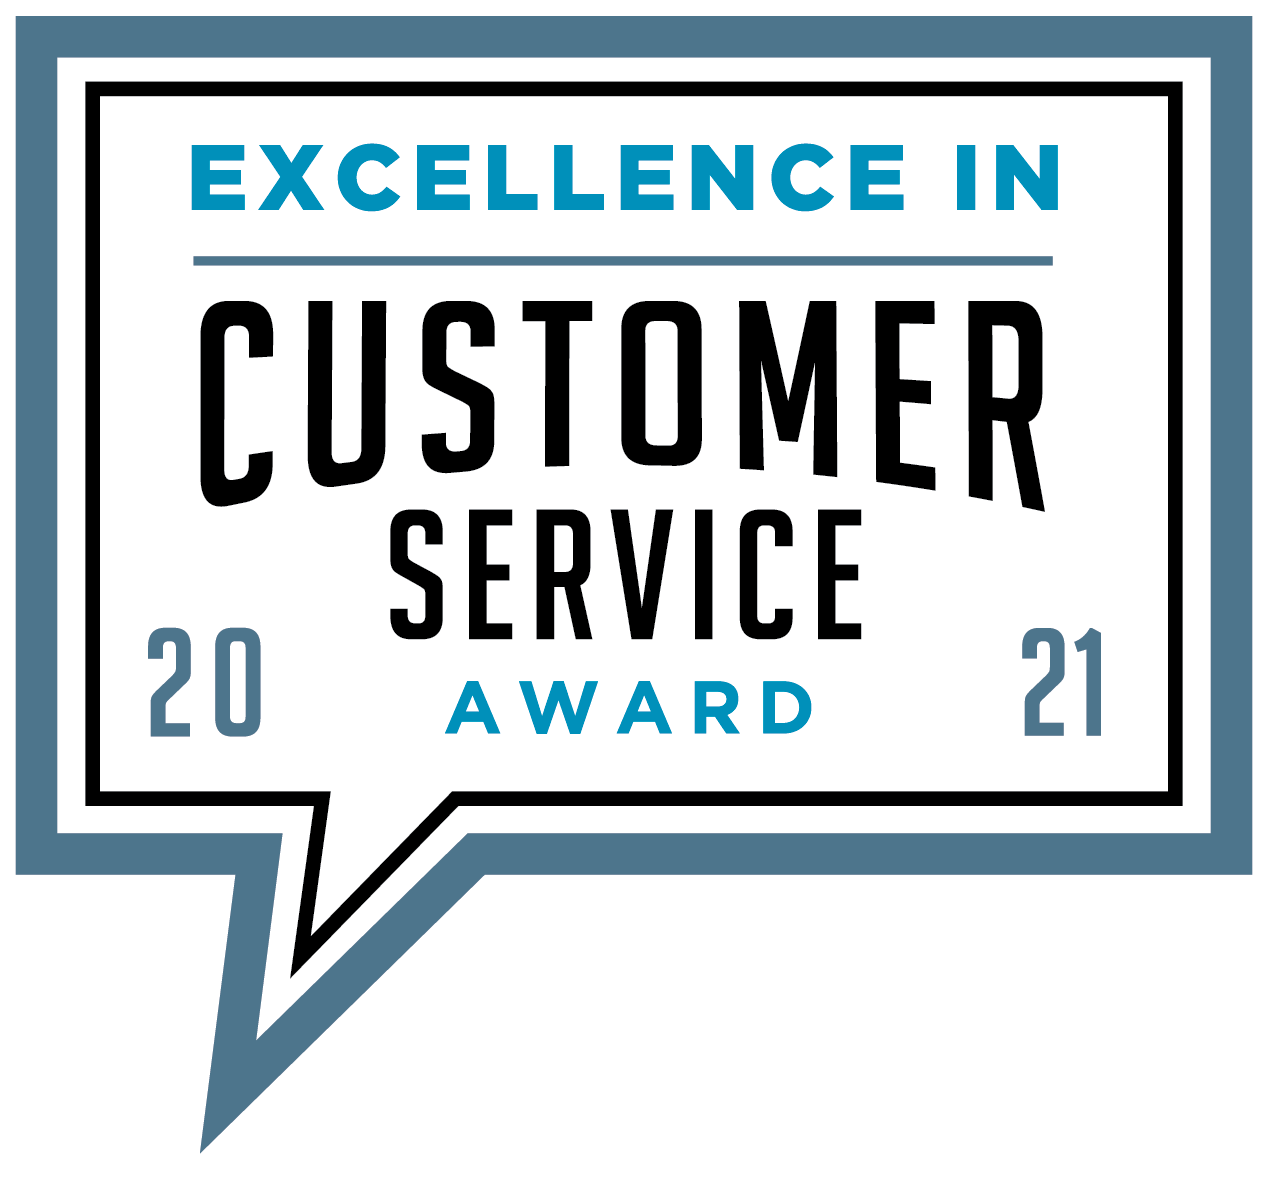 Business Intelligence Group: Excellence in Customer Service Award 2021